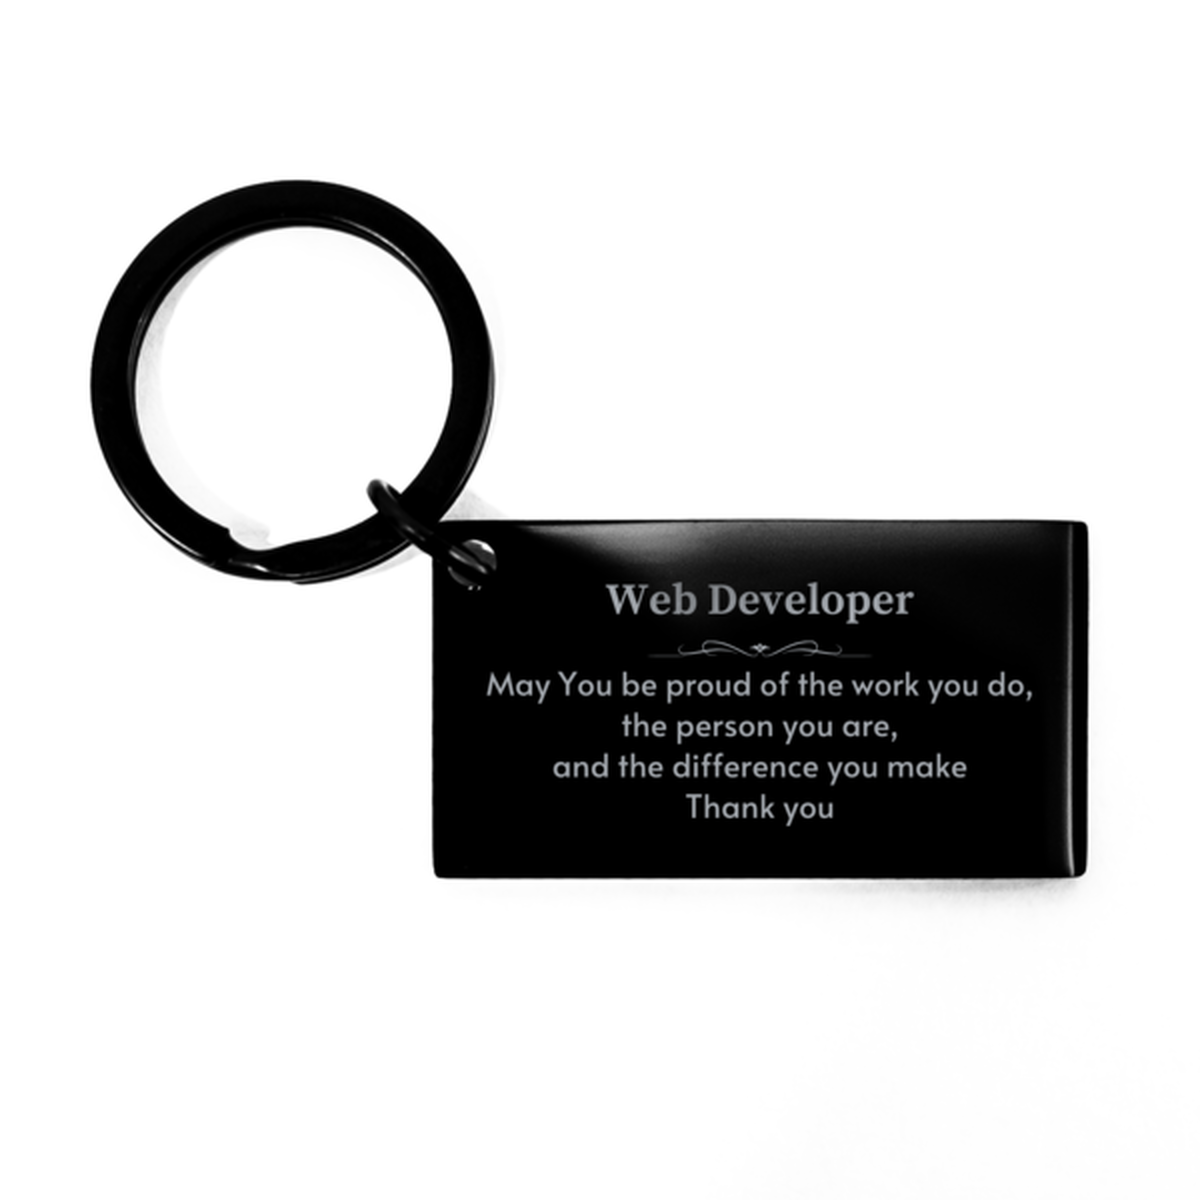 Heartwarming Keychain Retirement Coworkers Gifts for Web Developer, Assistant May You be proud of the work you do, the person you are Gifts for Boss Men Women Friends